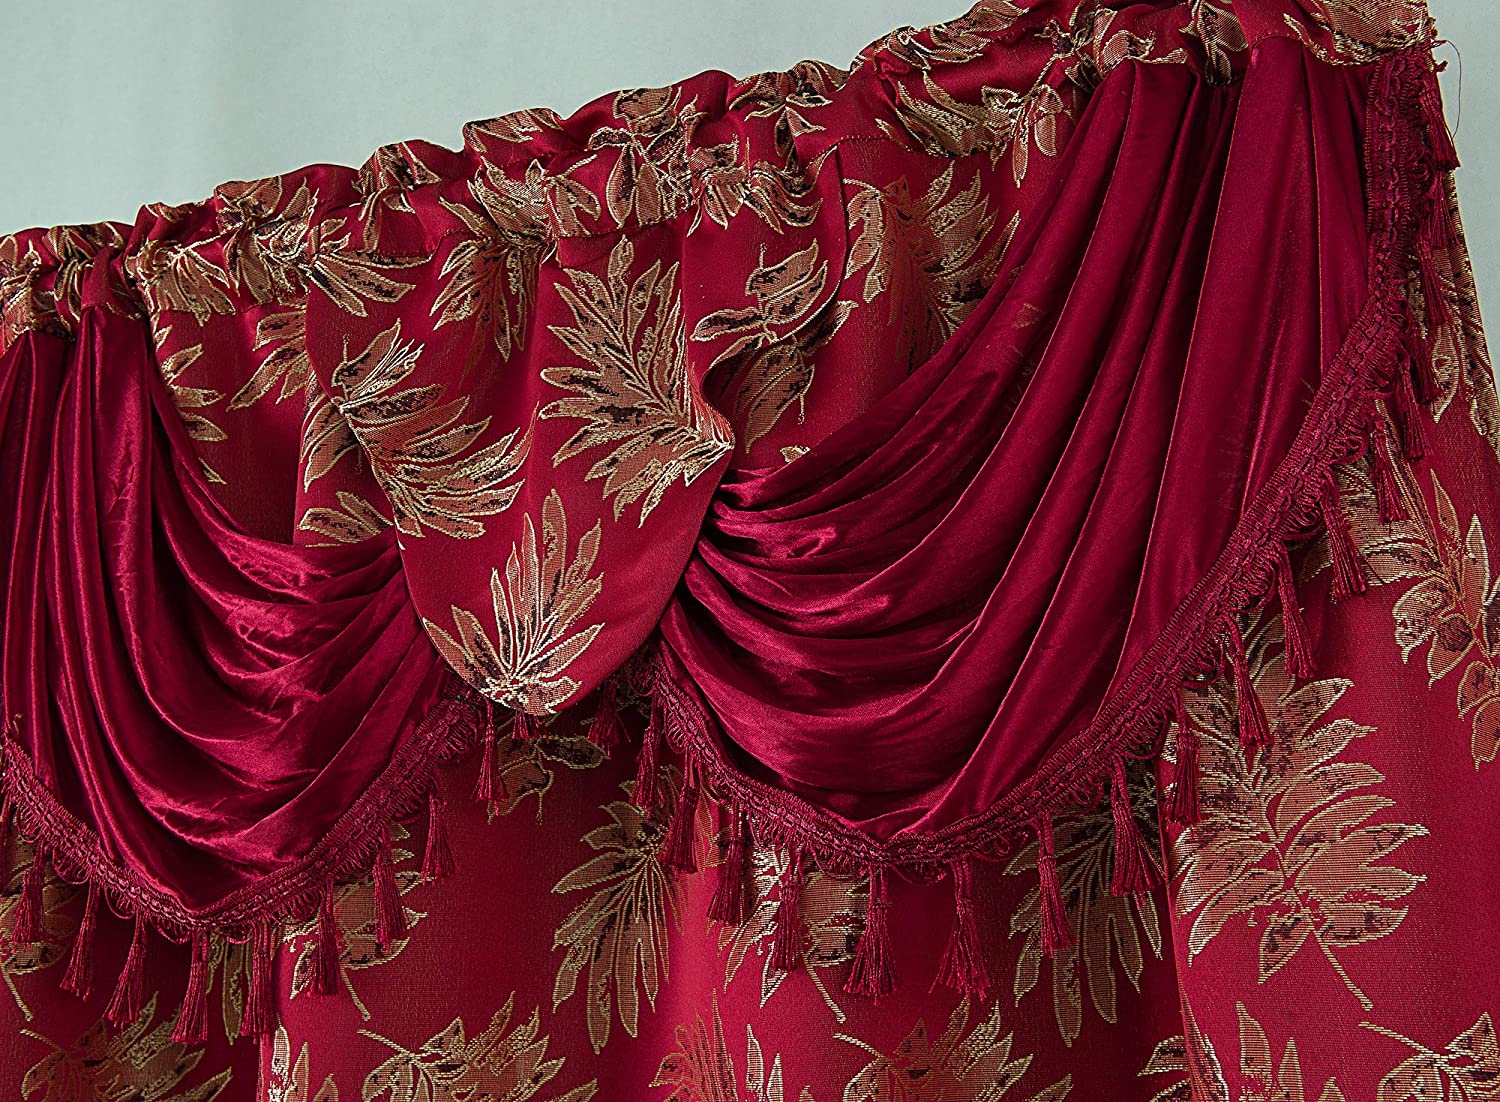 Palm Floral Textured Jacquard 54 x 84 in. Single Rod Pocket Curtain Panel w/Attached 18 in. Valance - Linen Universe Co.